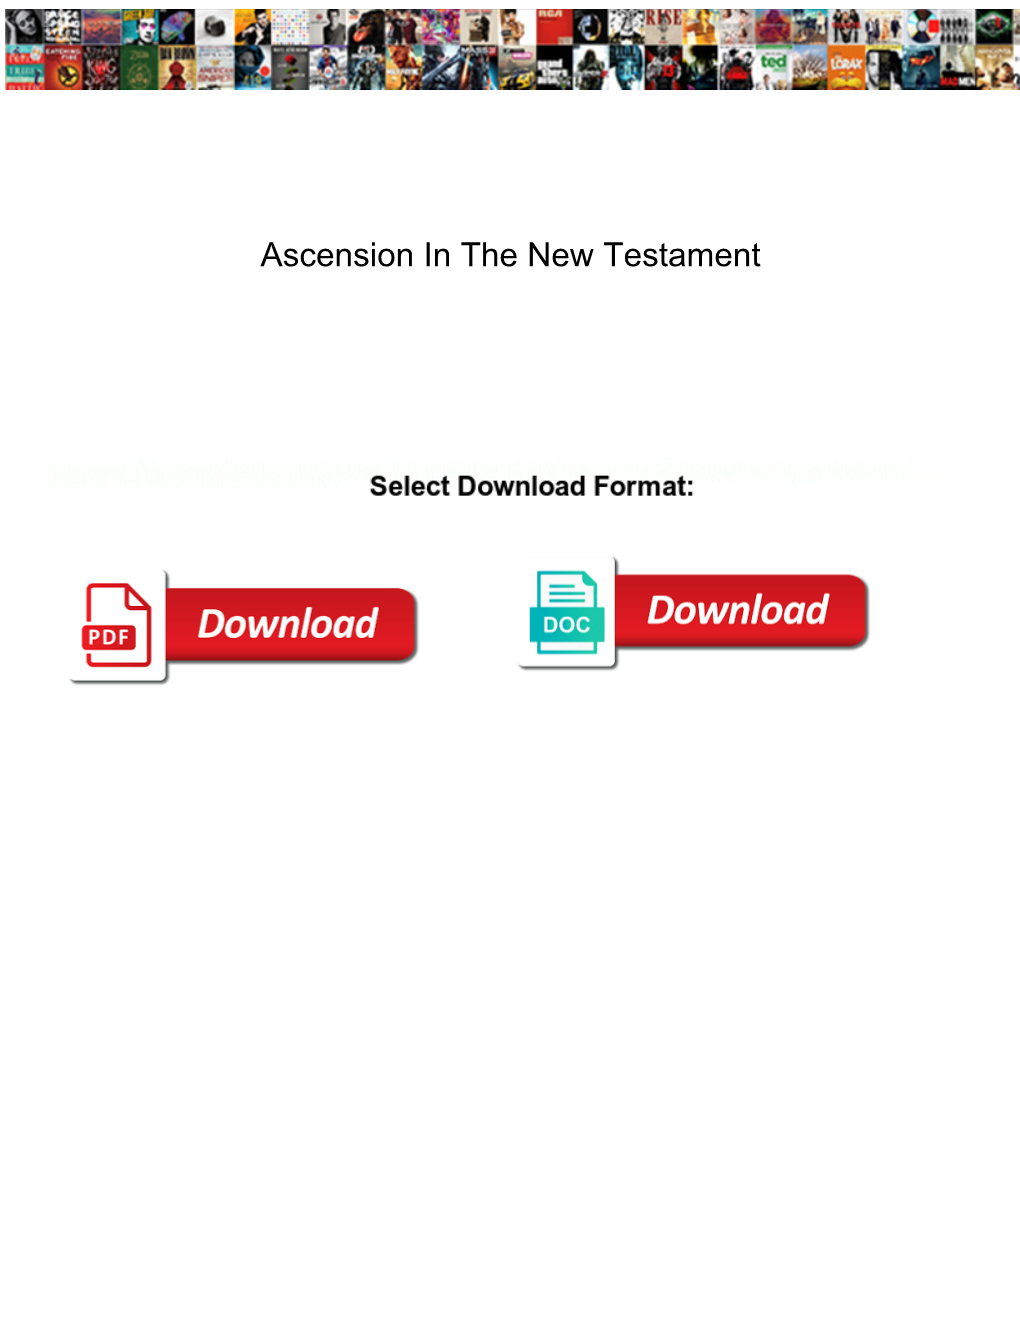 Ascension in the New Testament